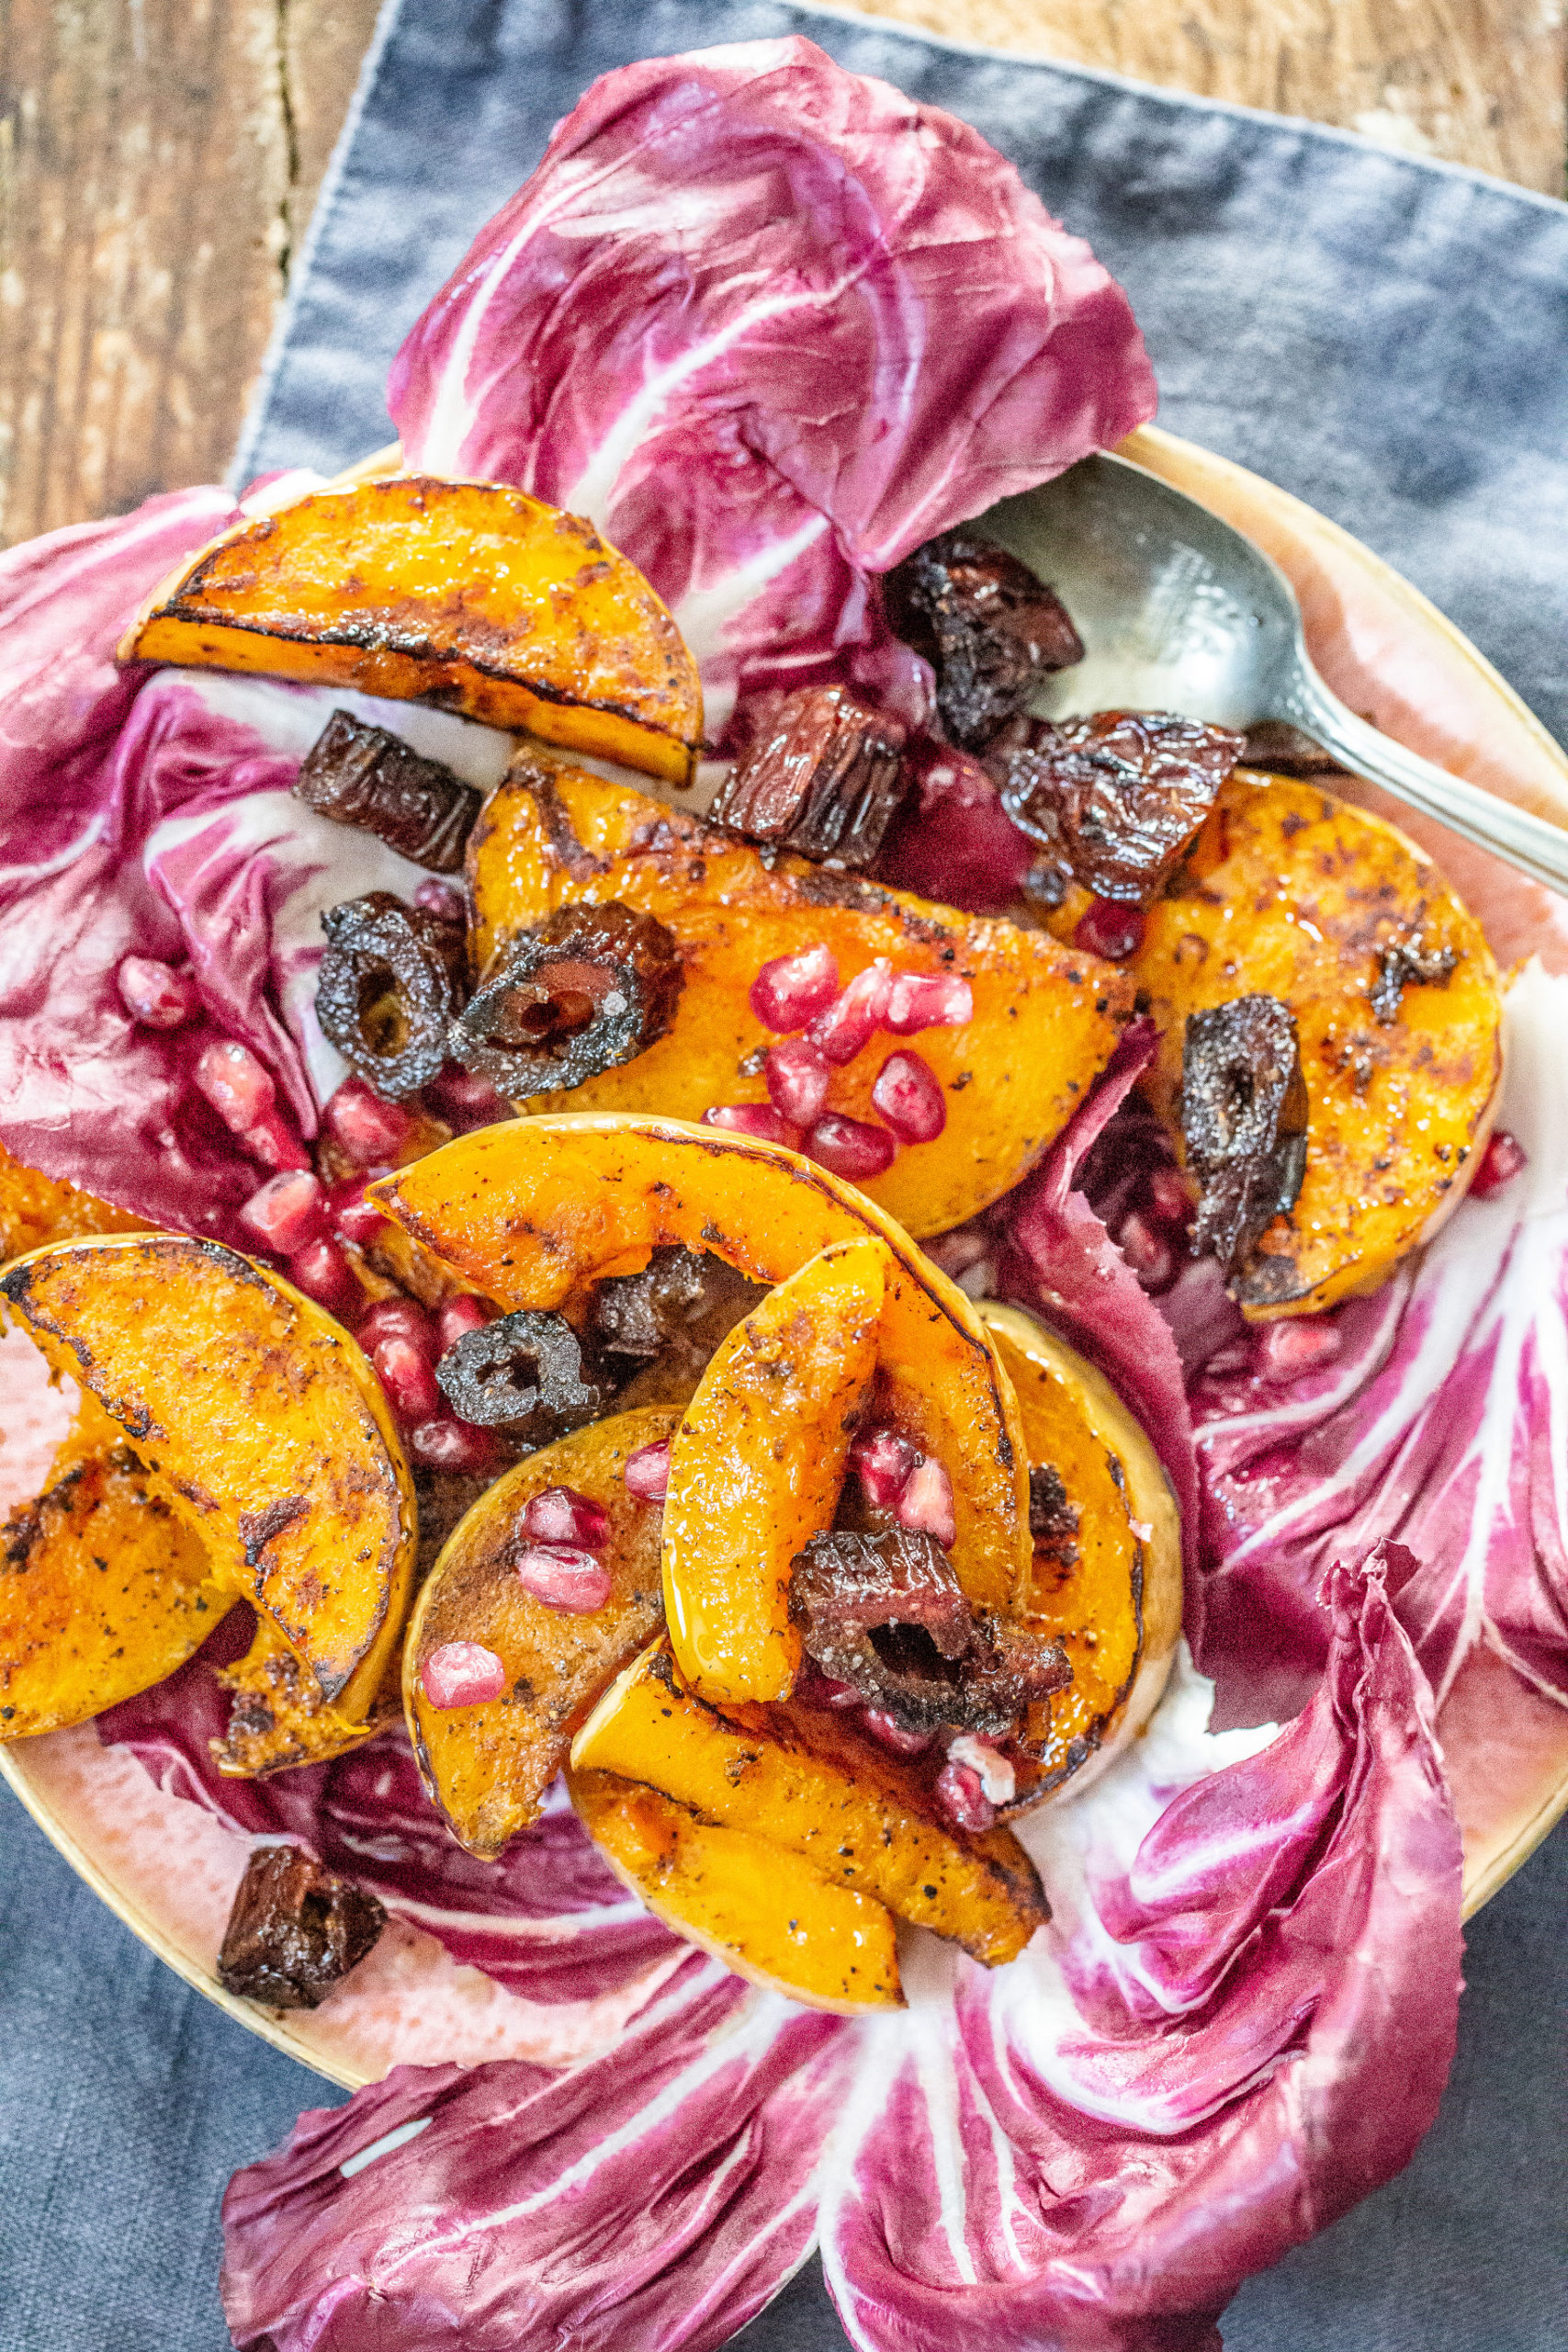 Warm Radicchio Salad with Squash and Caramelized Dates (beautiful for the holidays)